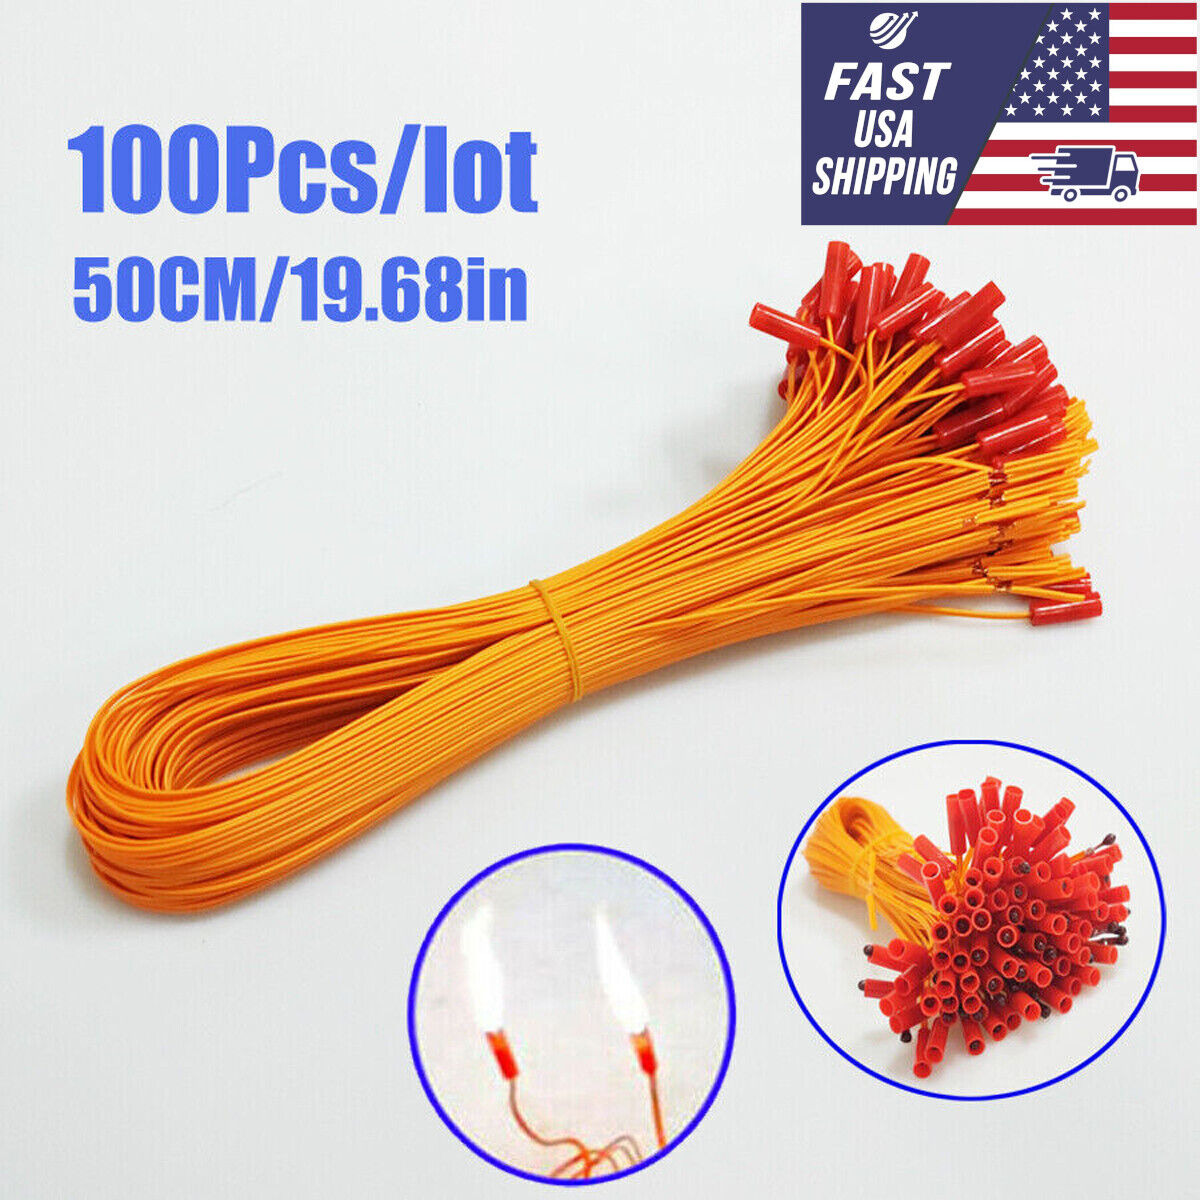 100Pcs 19.68In Electric Connect Wire Bundle Tool Remote Stage Fireworks System